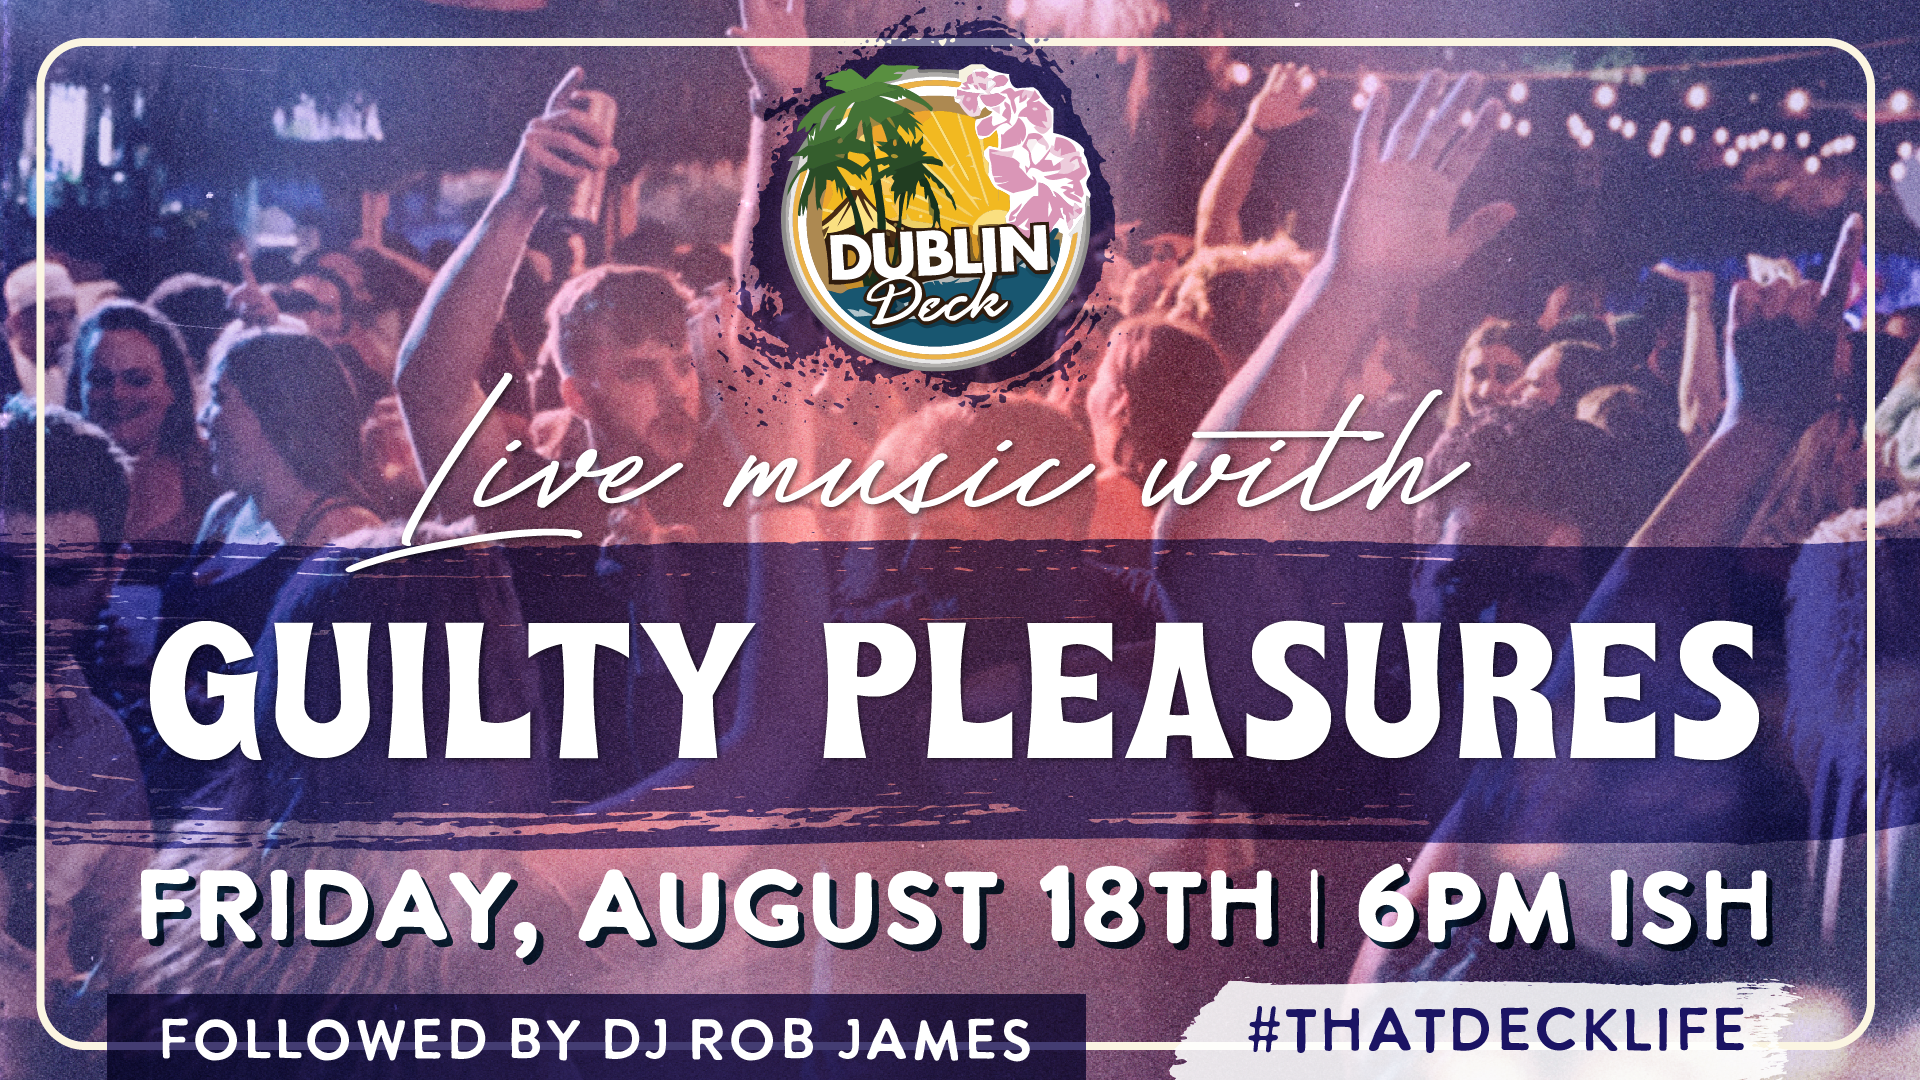 We're getting the weekend started off with Guilty Pleasures on stage! Music begins at 6PM-ish